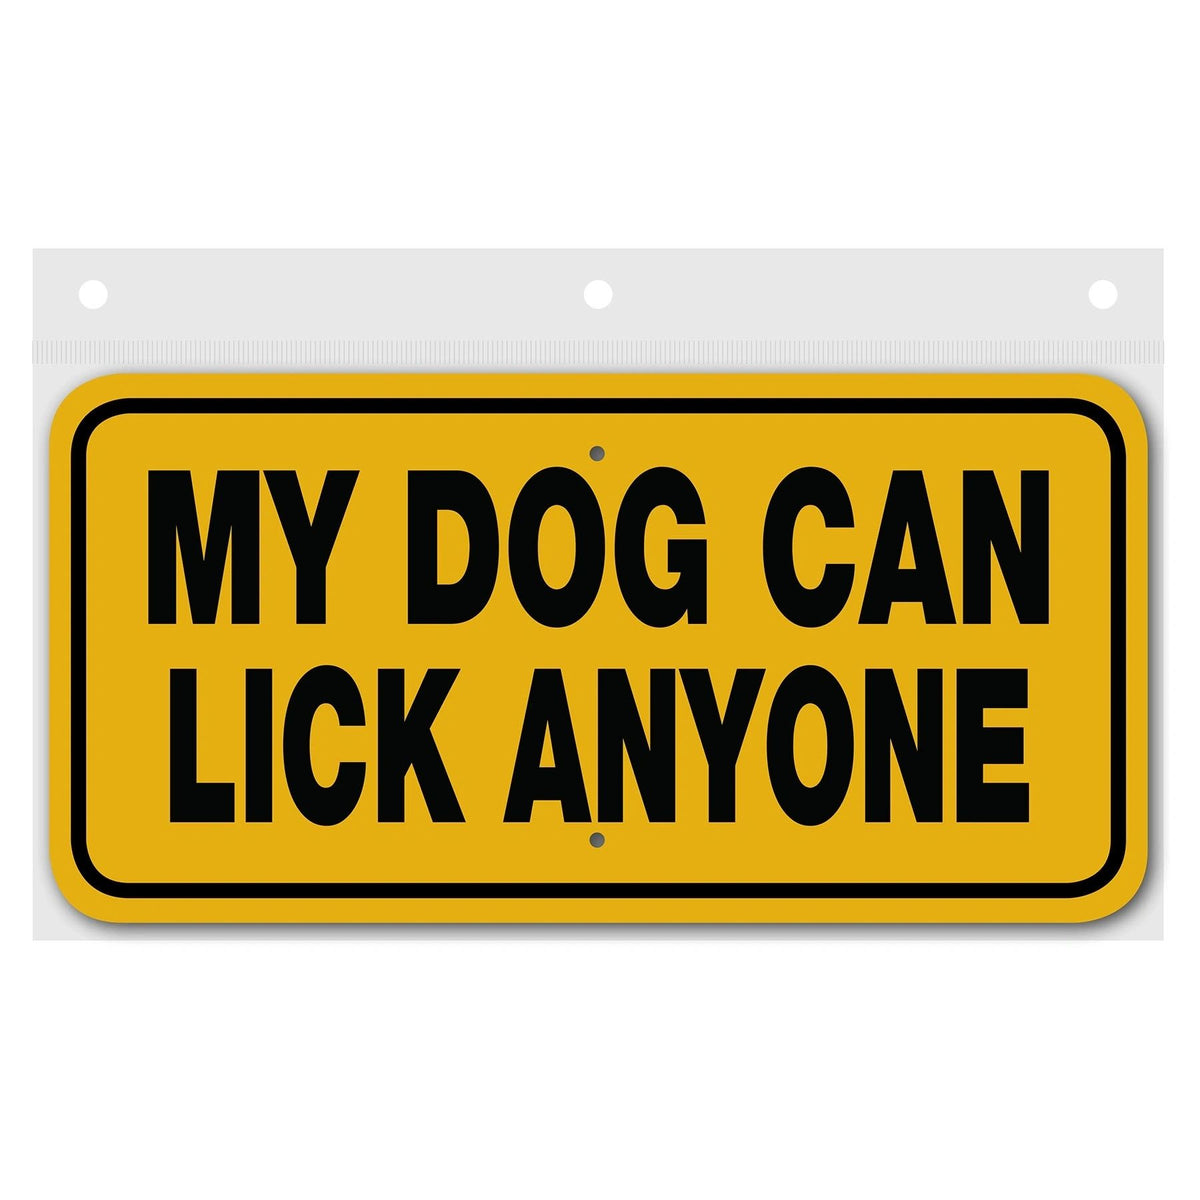 My Dog Can Lick Anyone Sign Aluminum 6 in X 12 in #3444448